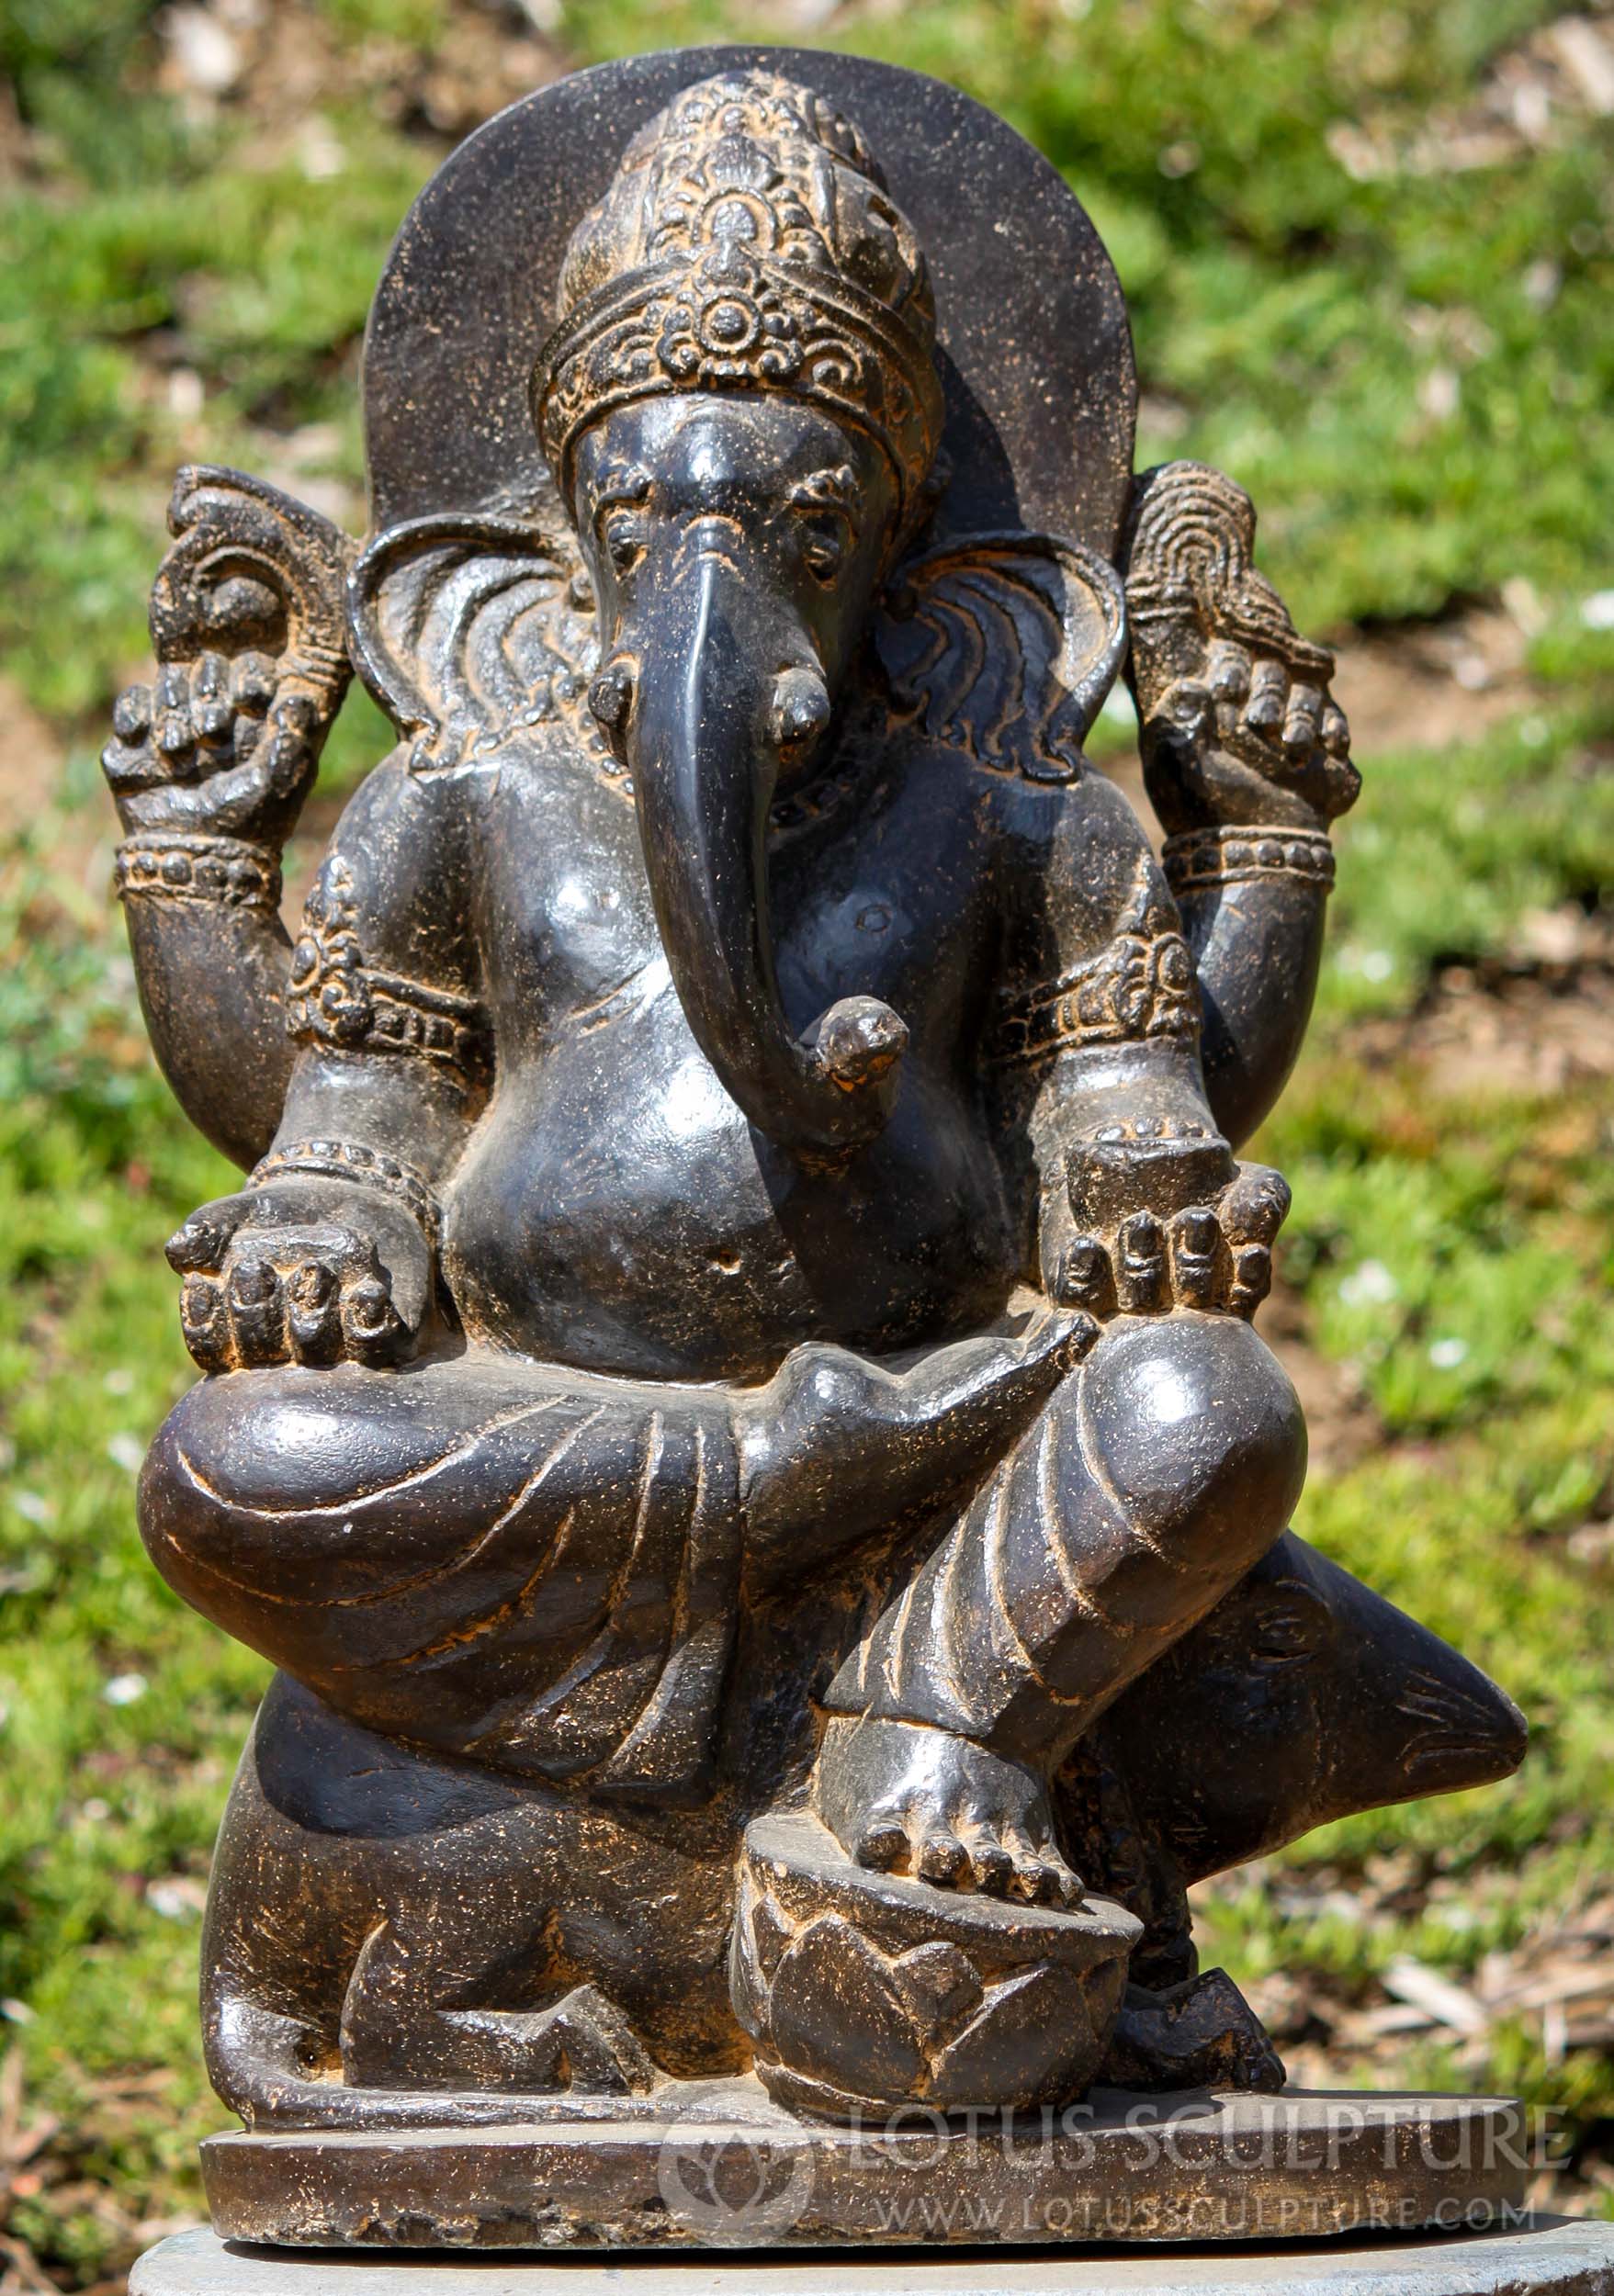 SOLD Saffron Hand Carved Lava Stone Garden Ganesh on Rat with Foot ...